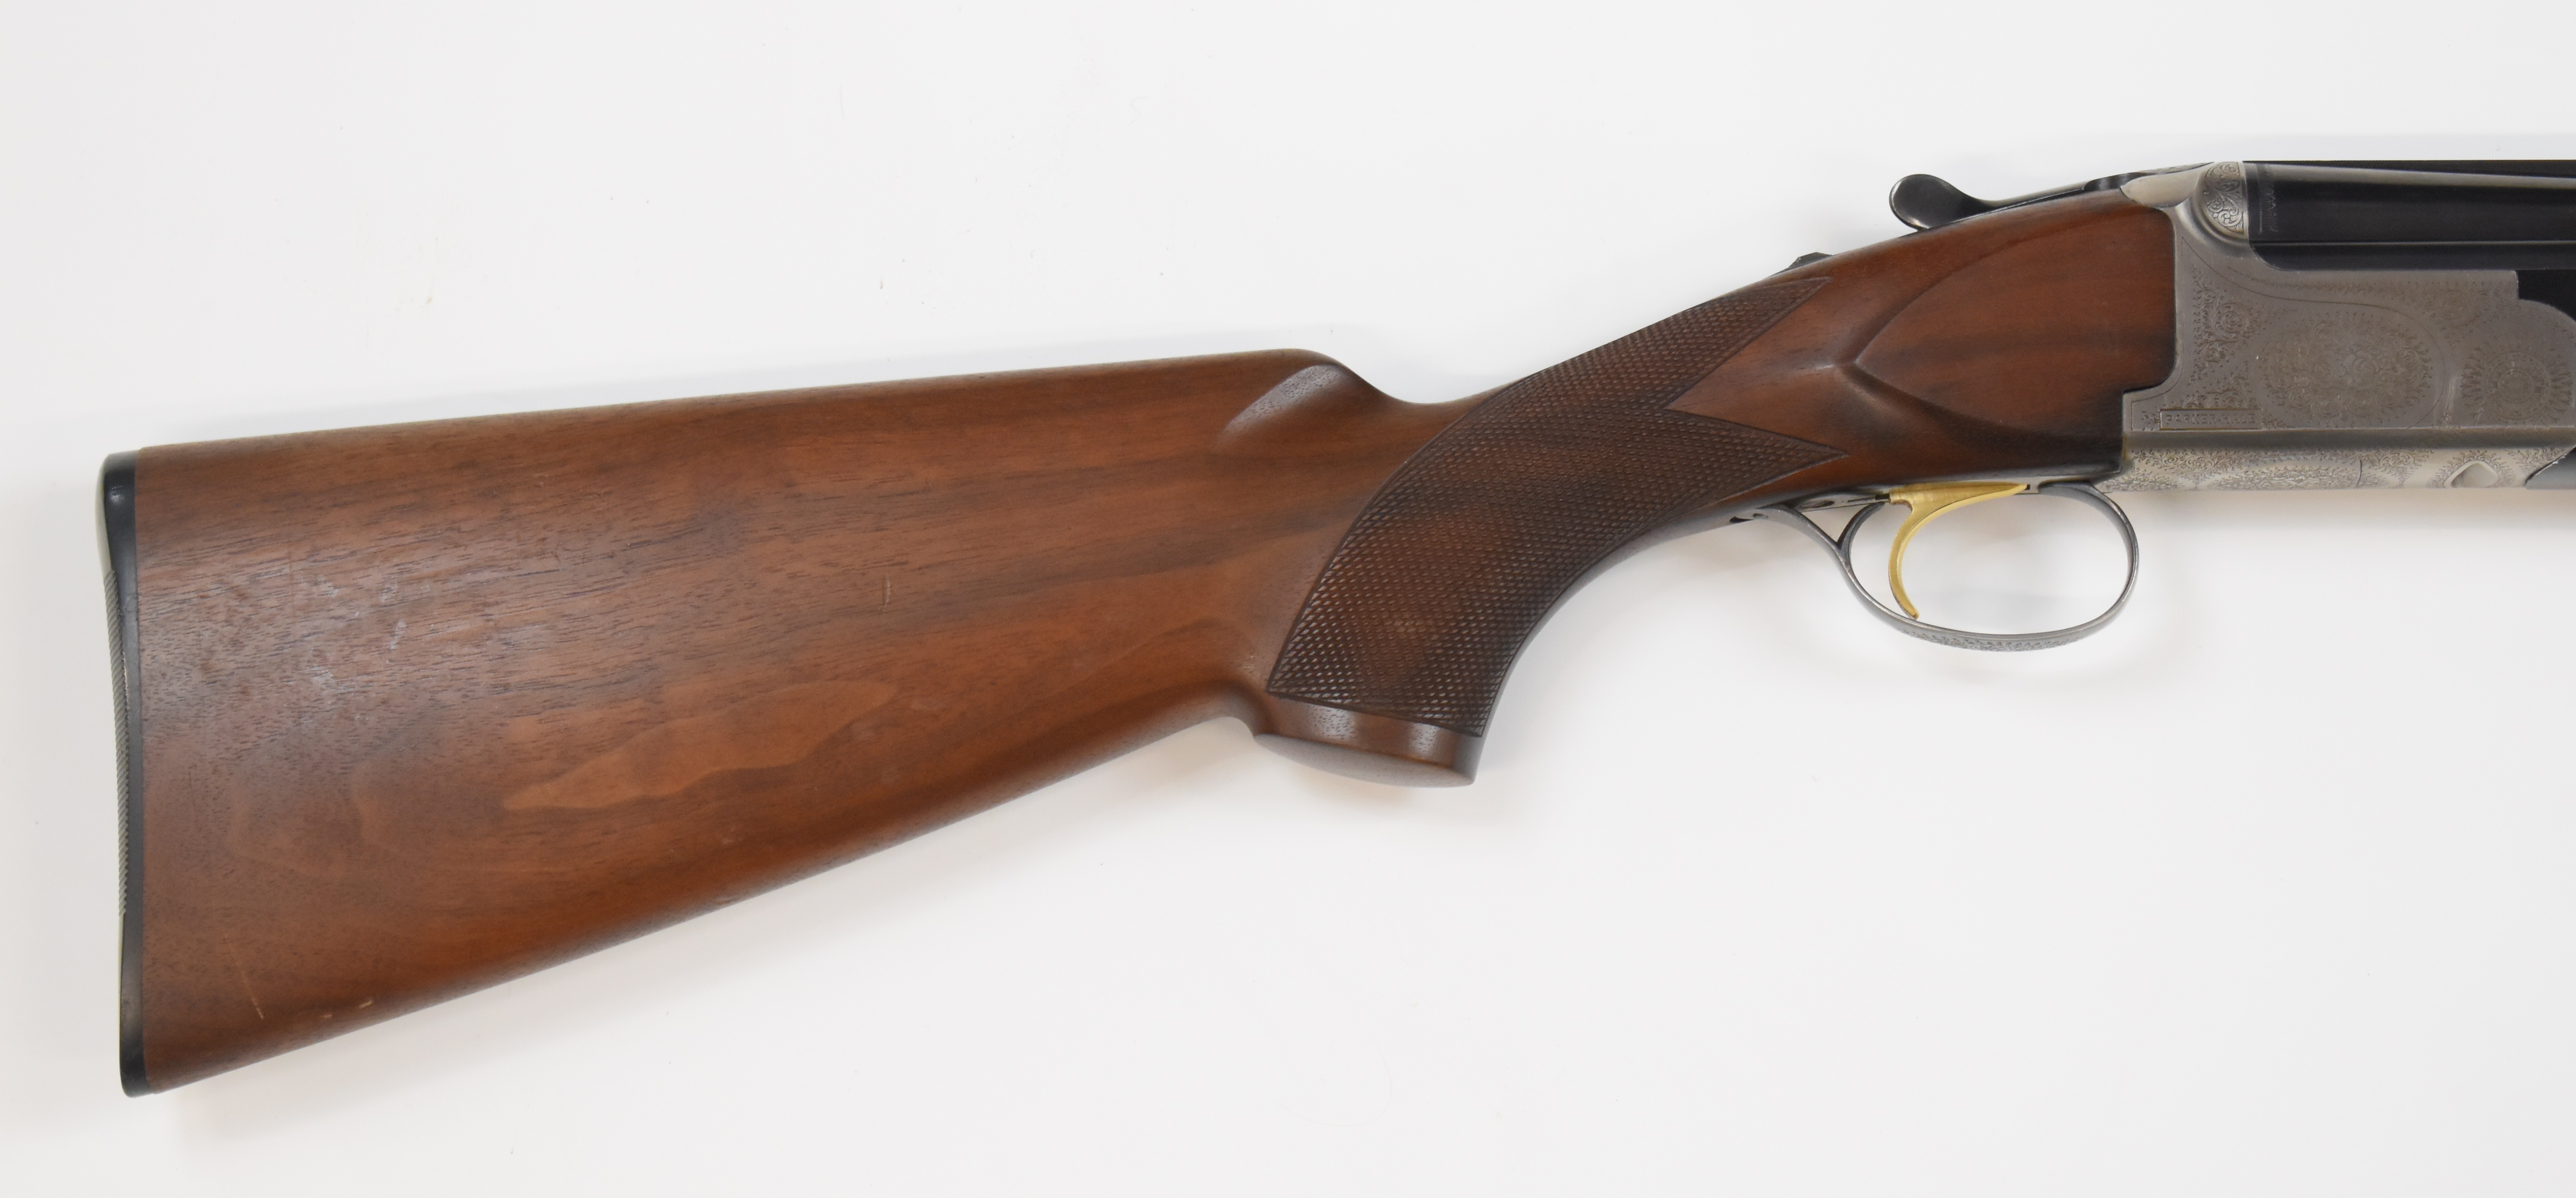 Parker-Hale 12 bore over and under ejector shotgun with named and engraved lock, engraved trigger - Image 3 of 10